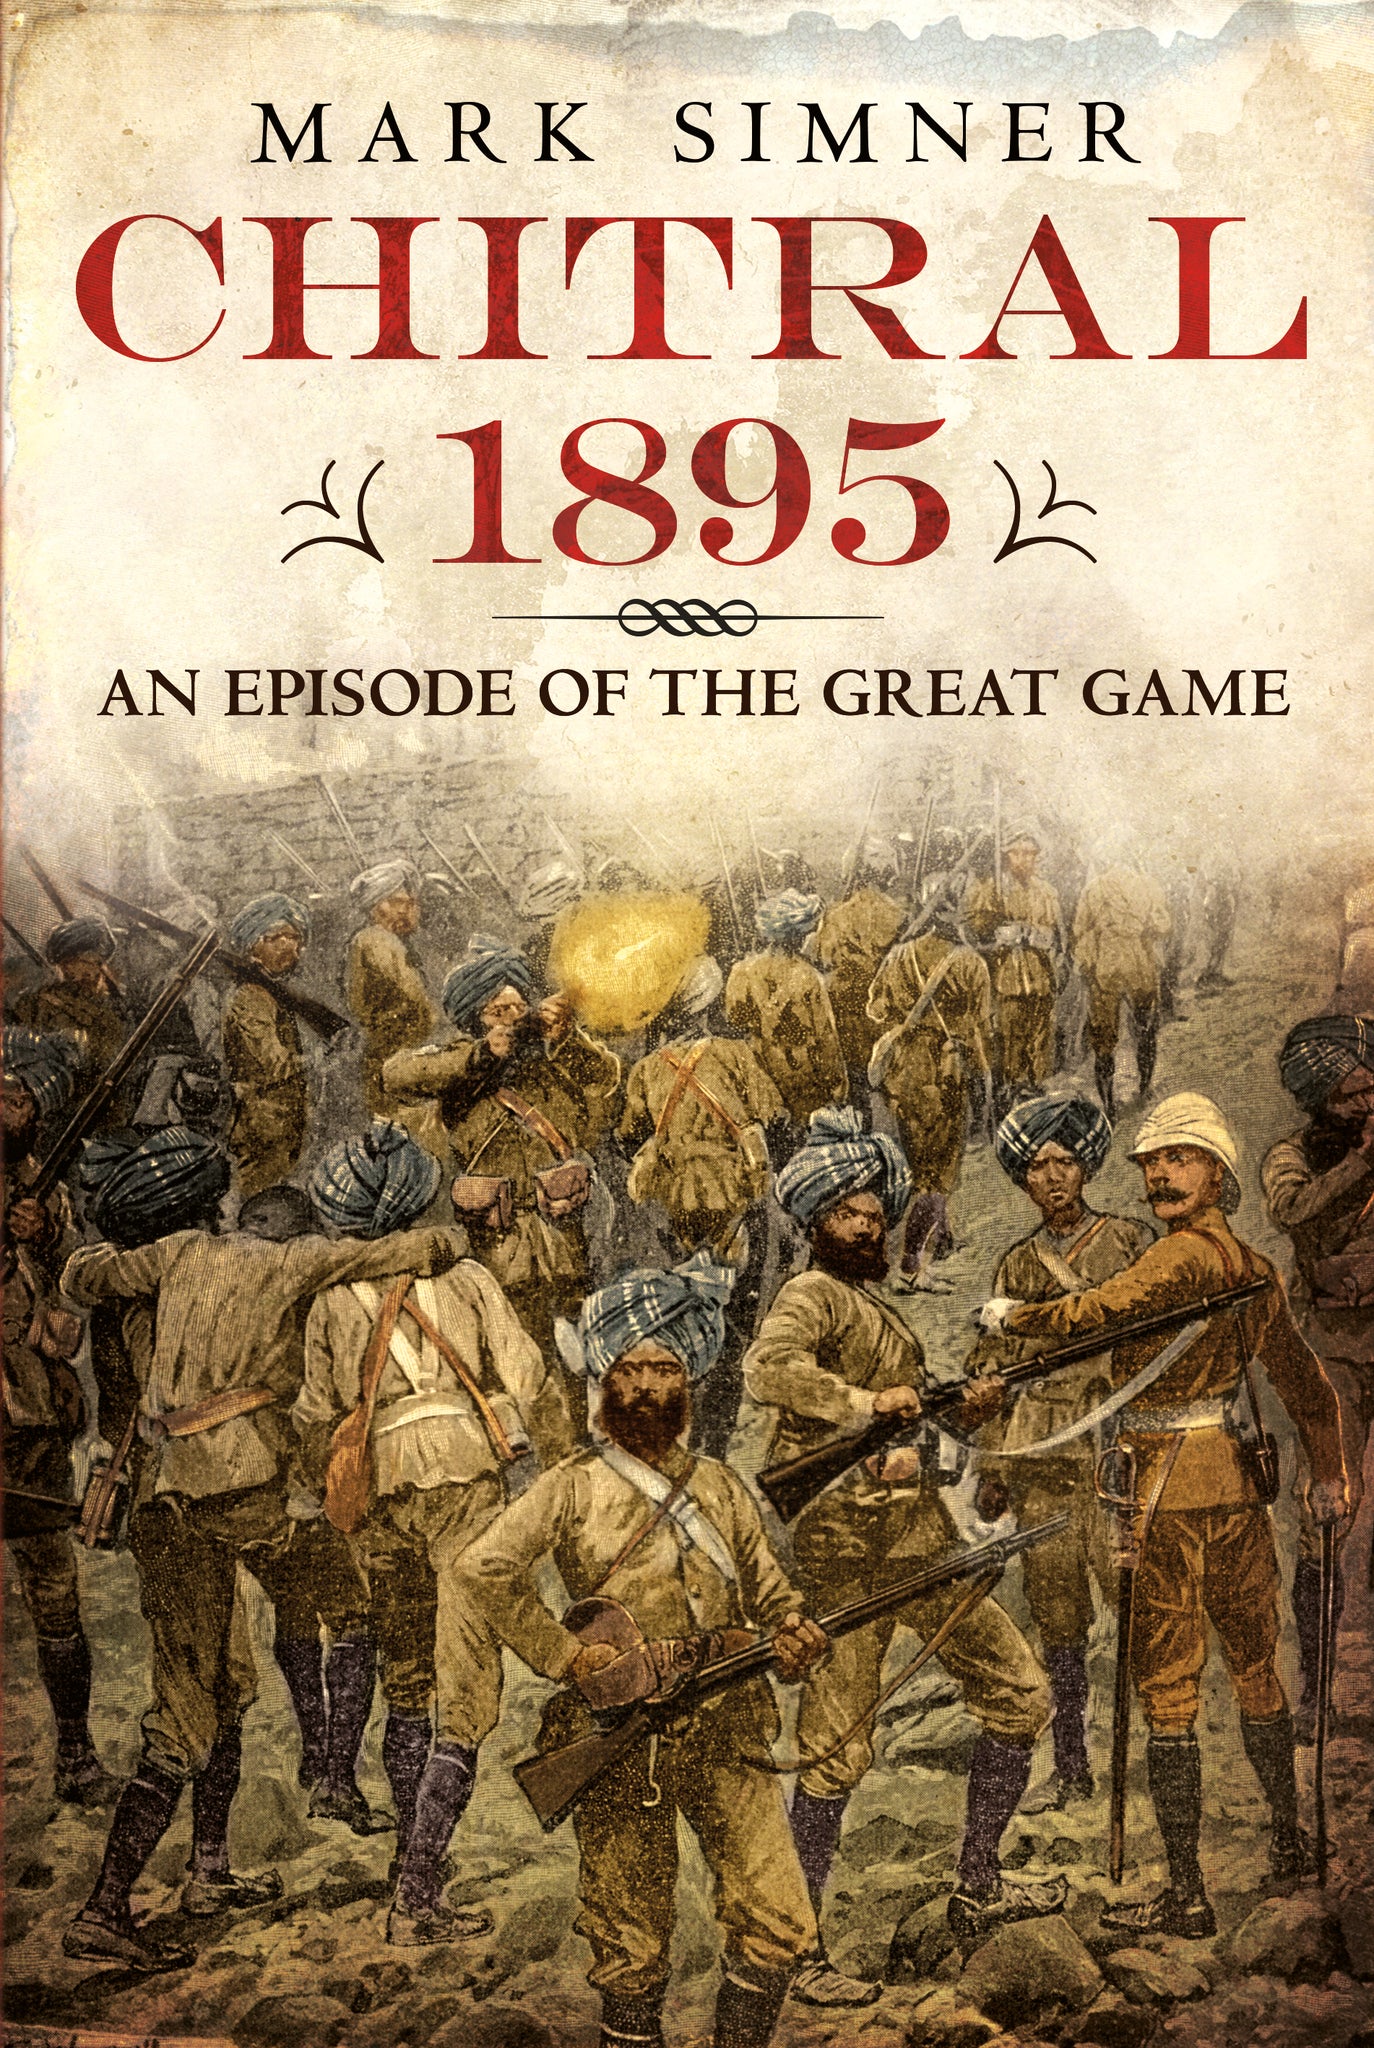 Chitral 1895: An Episode of the Great Game - published by Fonthill Media